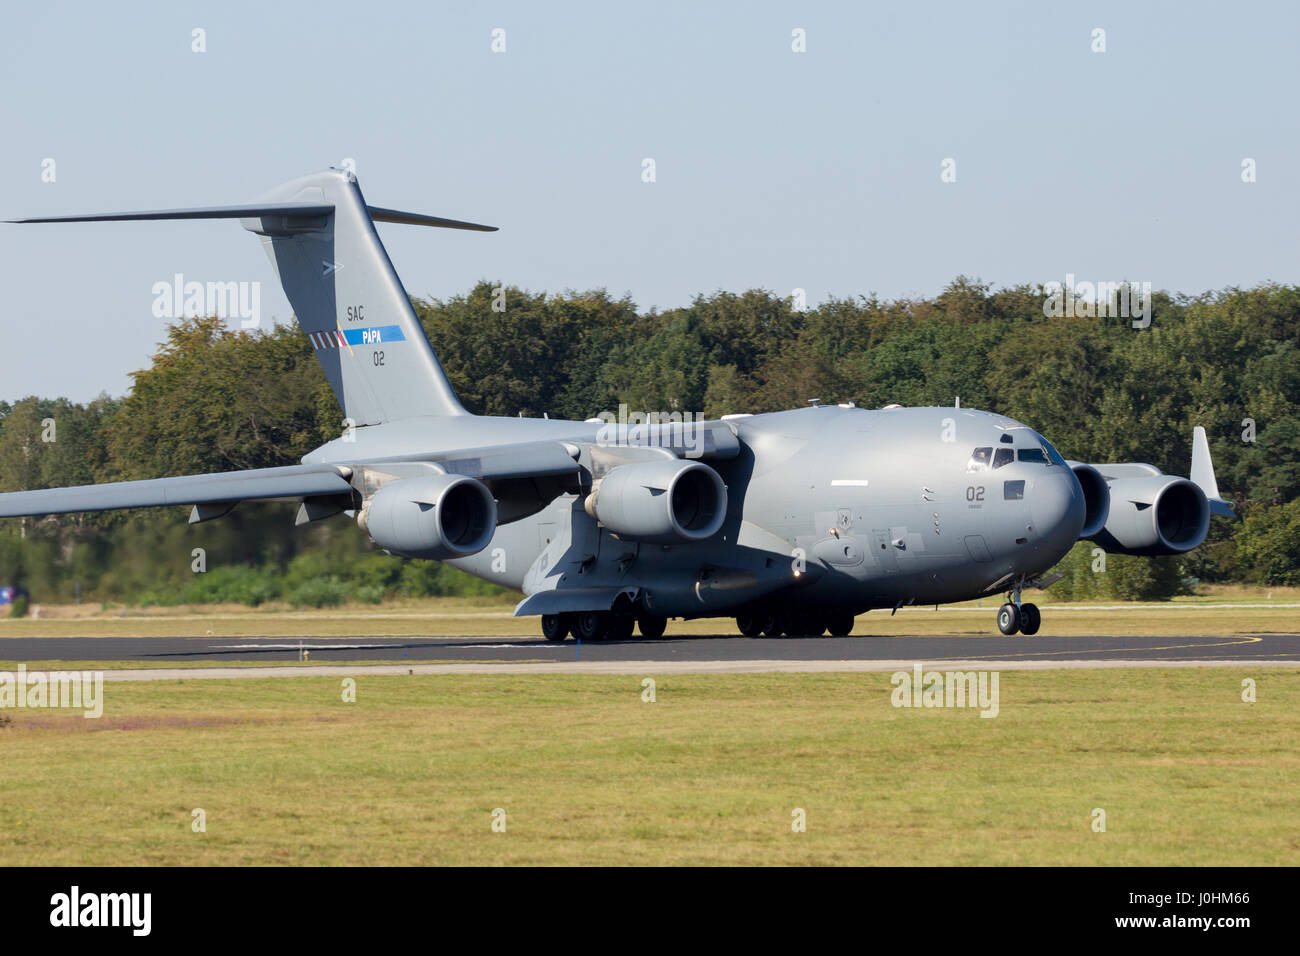 GILZE RIJEN, THE NETHERLANDS - Military Boeing C-17 Globemaster III cargo plane touch-and-go.The plane belongs to SAC and is used by a consortium of 1 Stock Photo